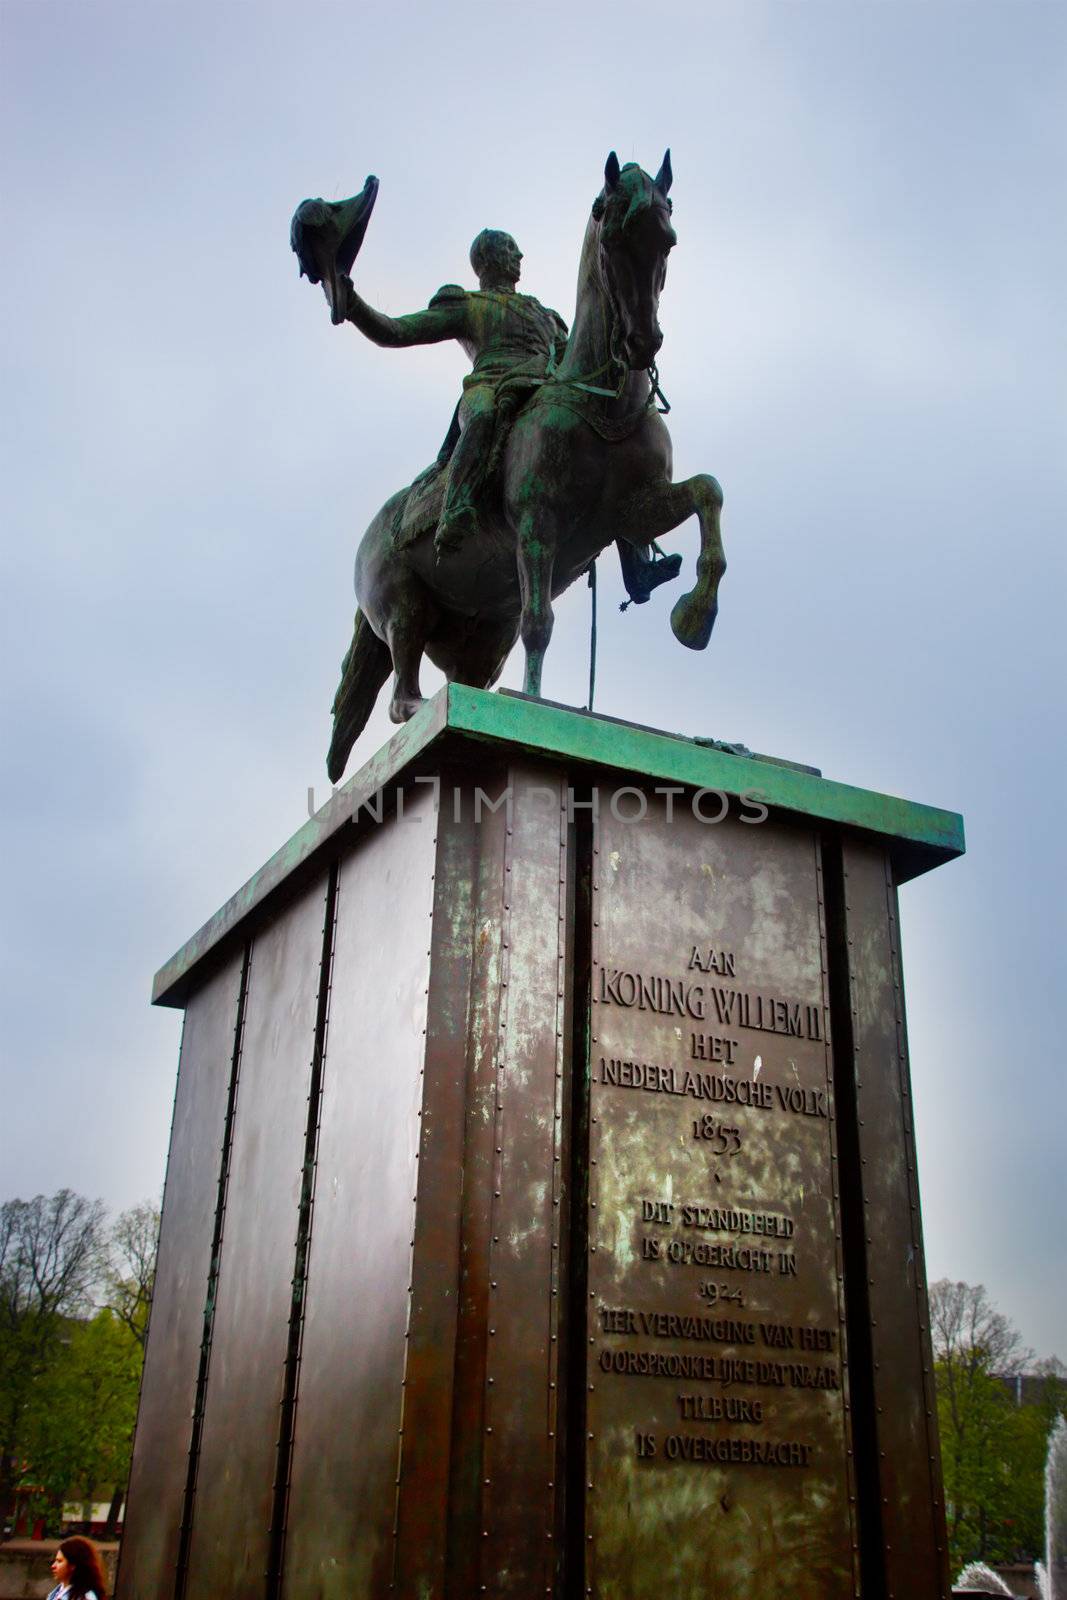 Koning Willem II statue, The Hague by photocreo